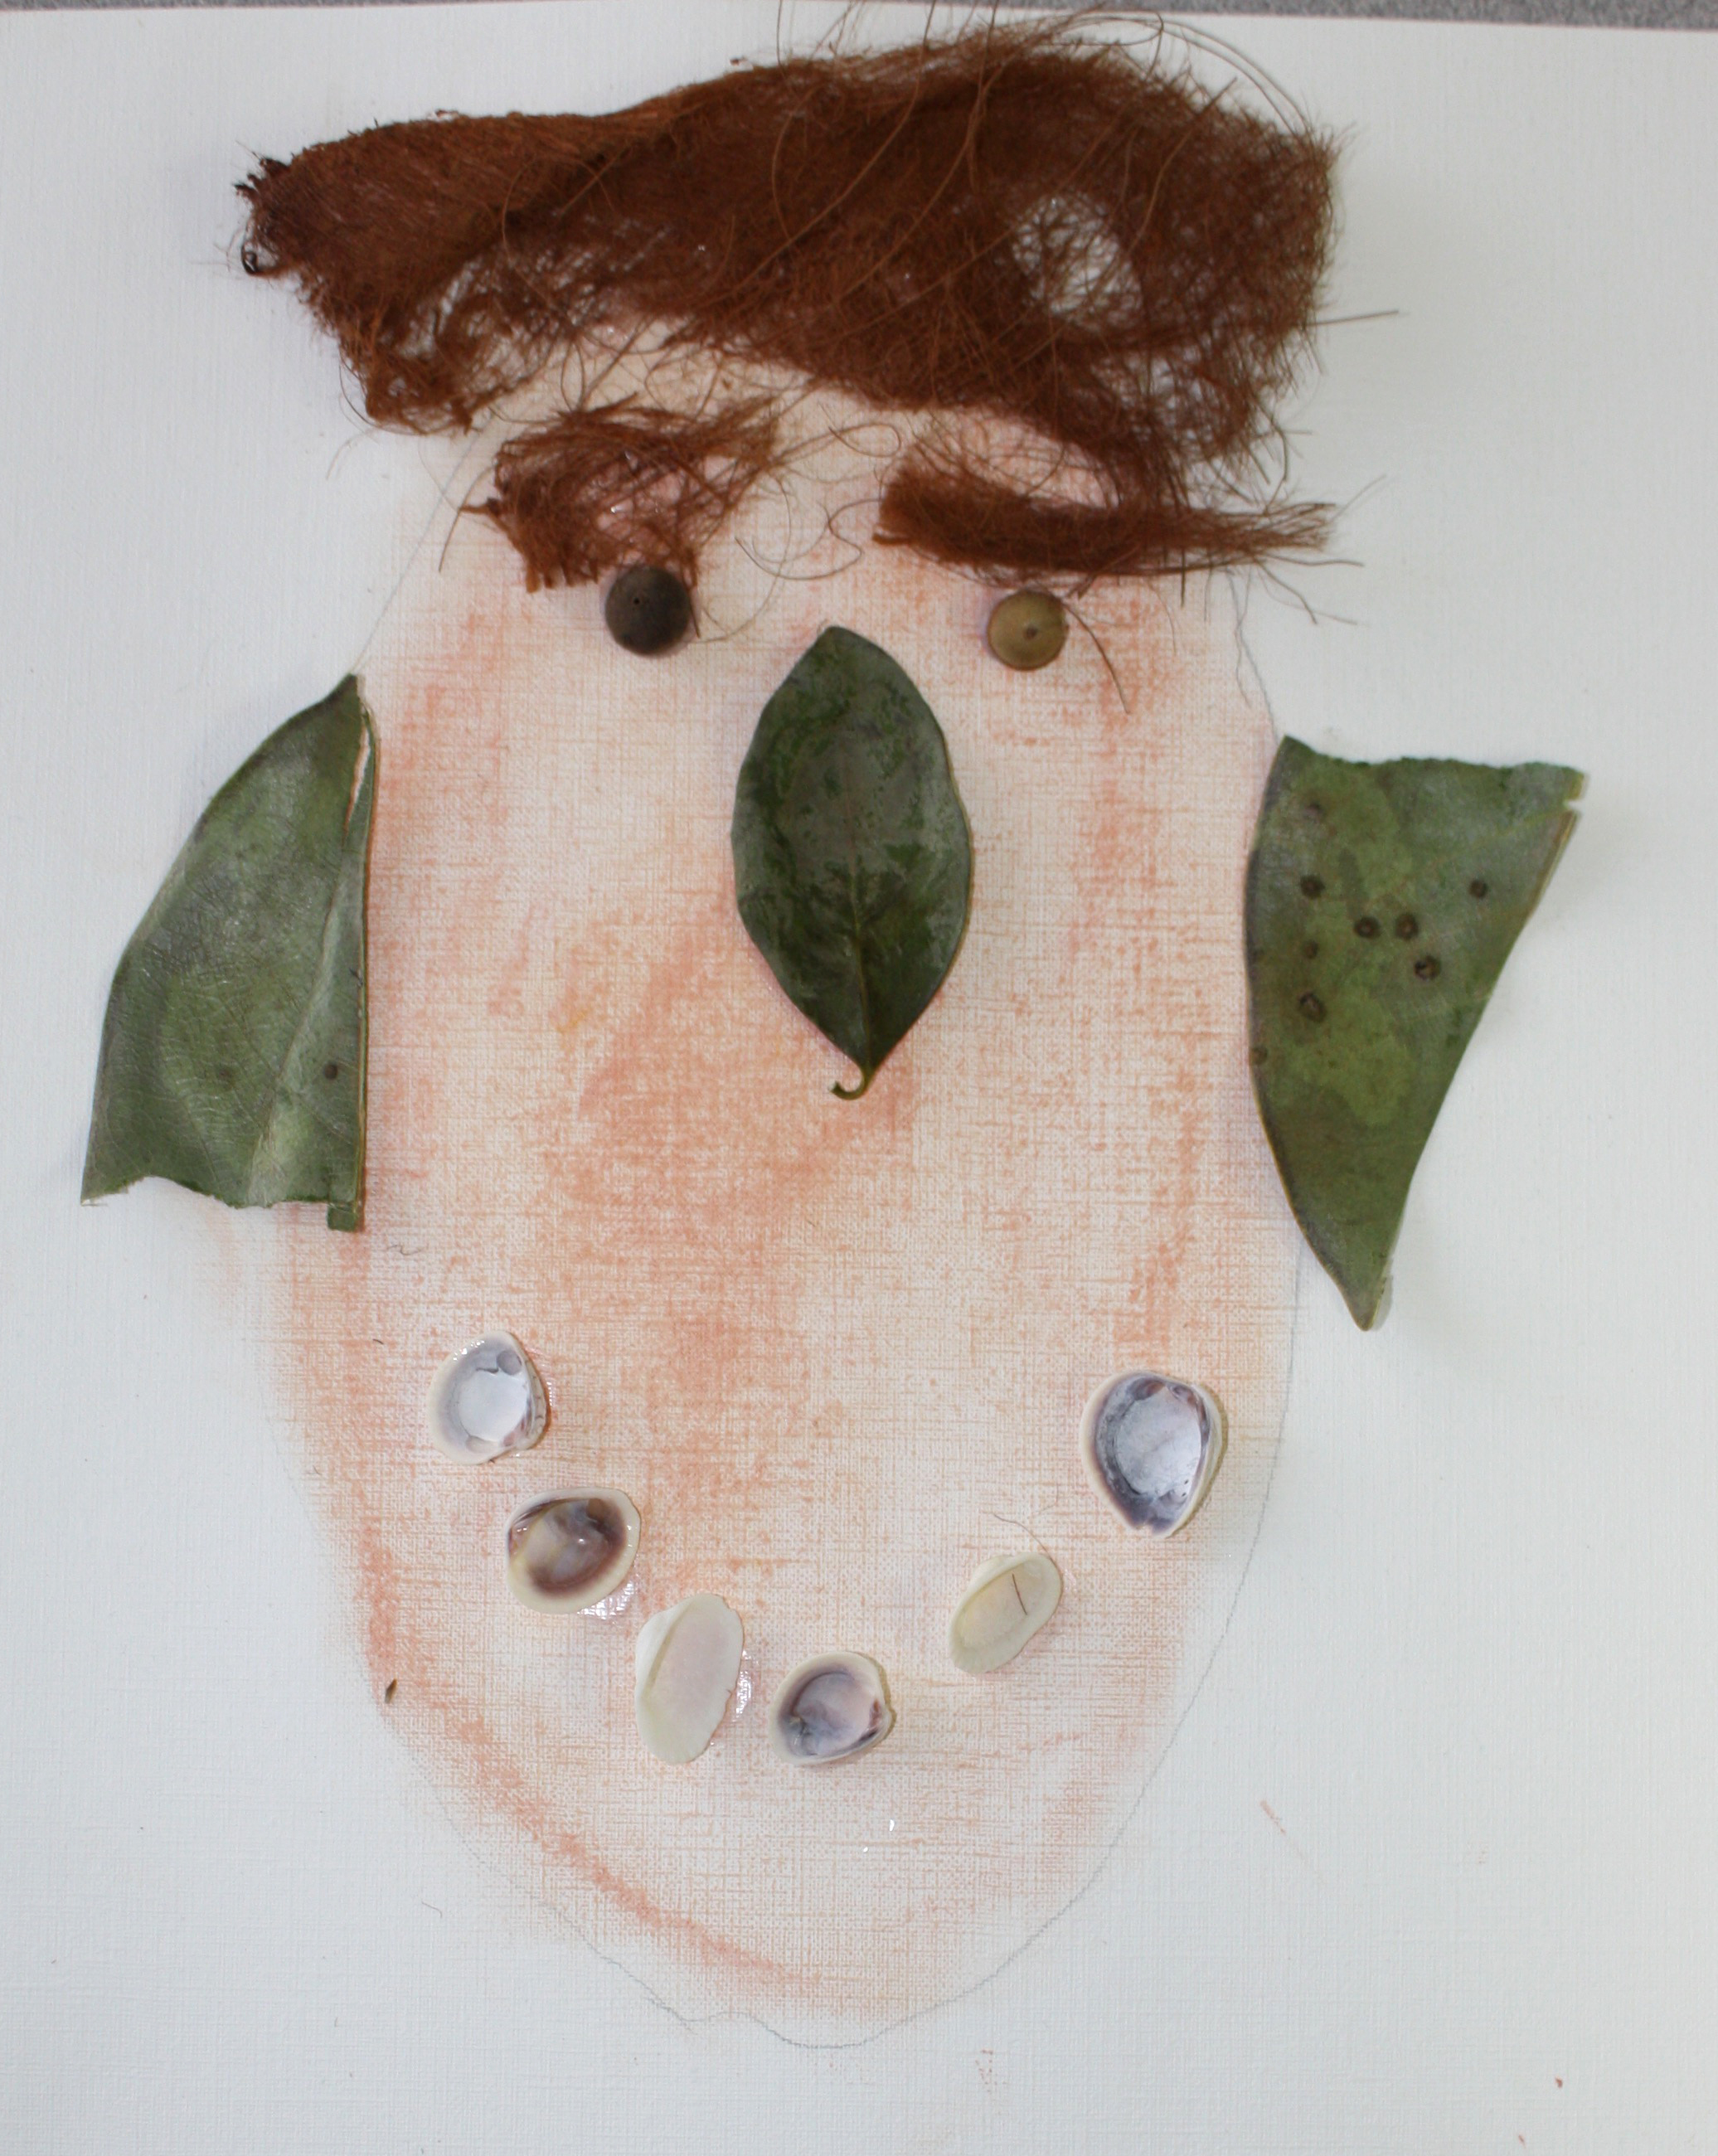 Child's self-portrait collage using natural materials